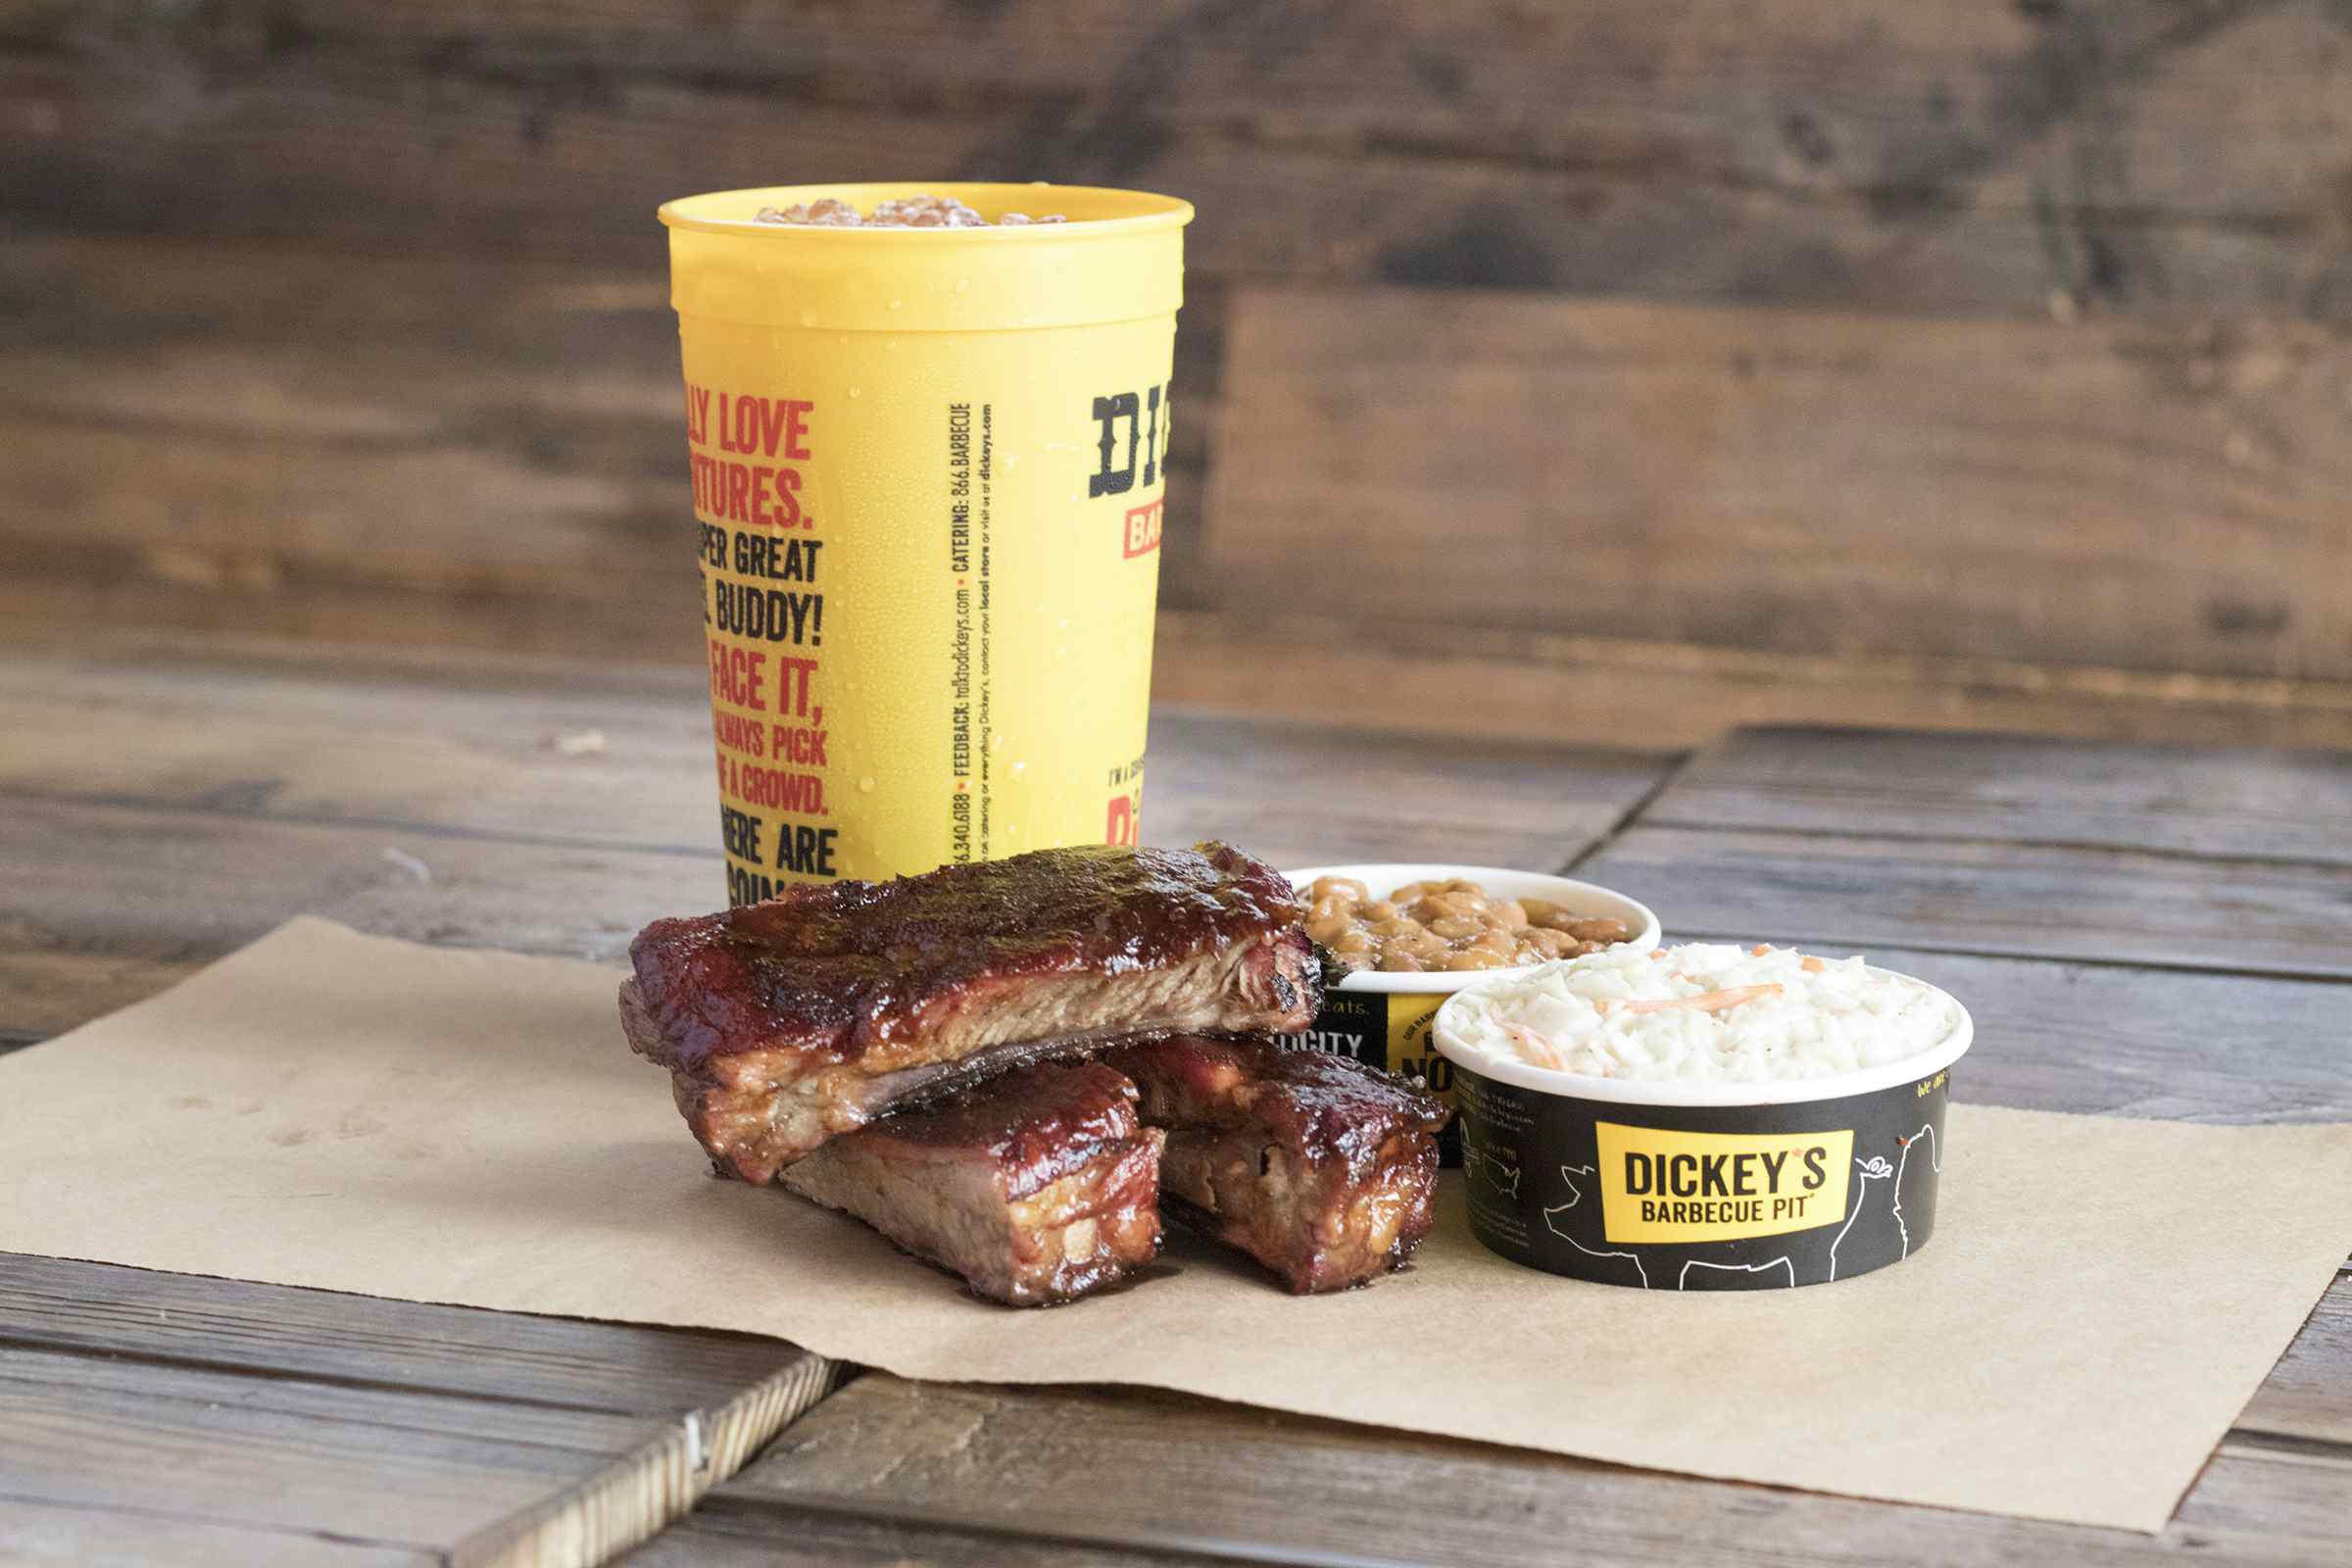 Dickey’s named #3 Best Barbecue